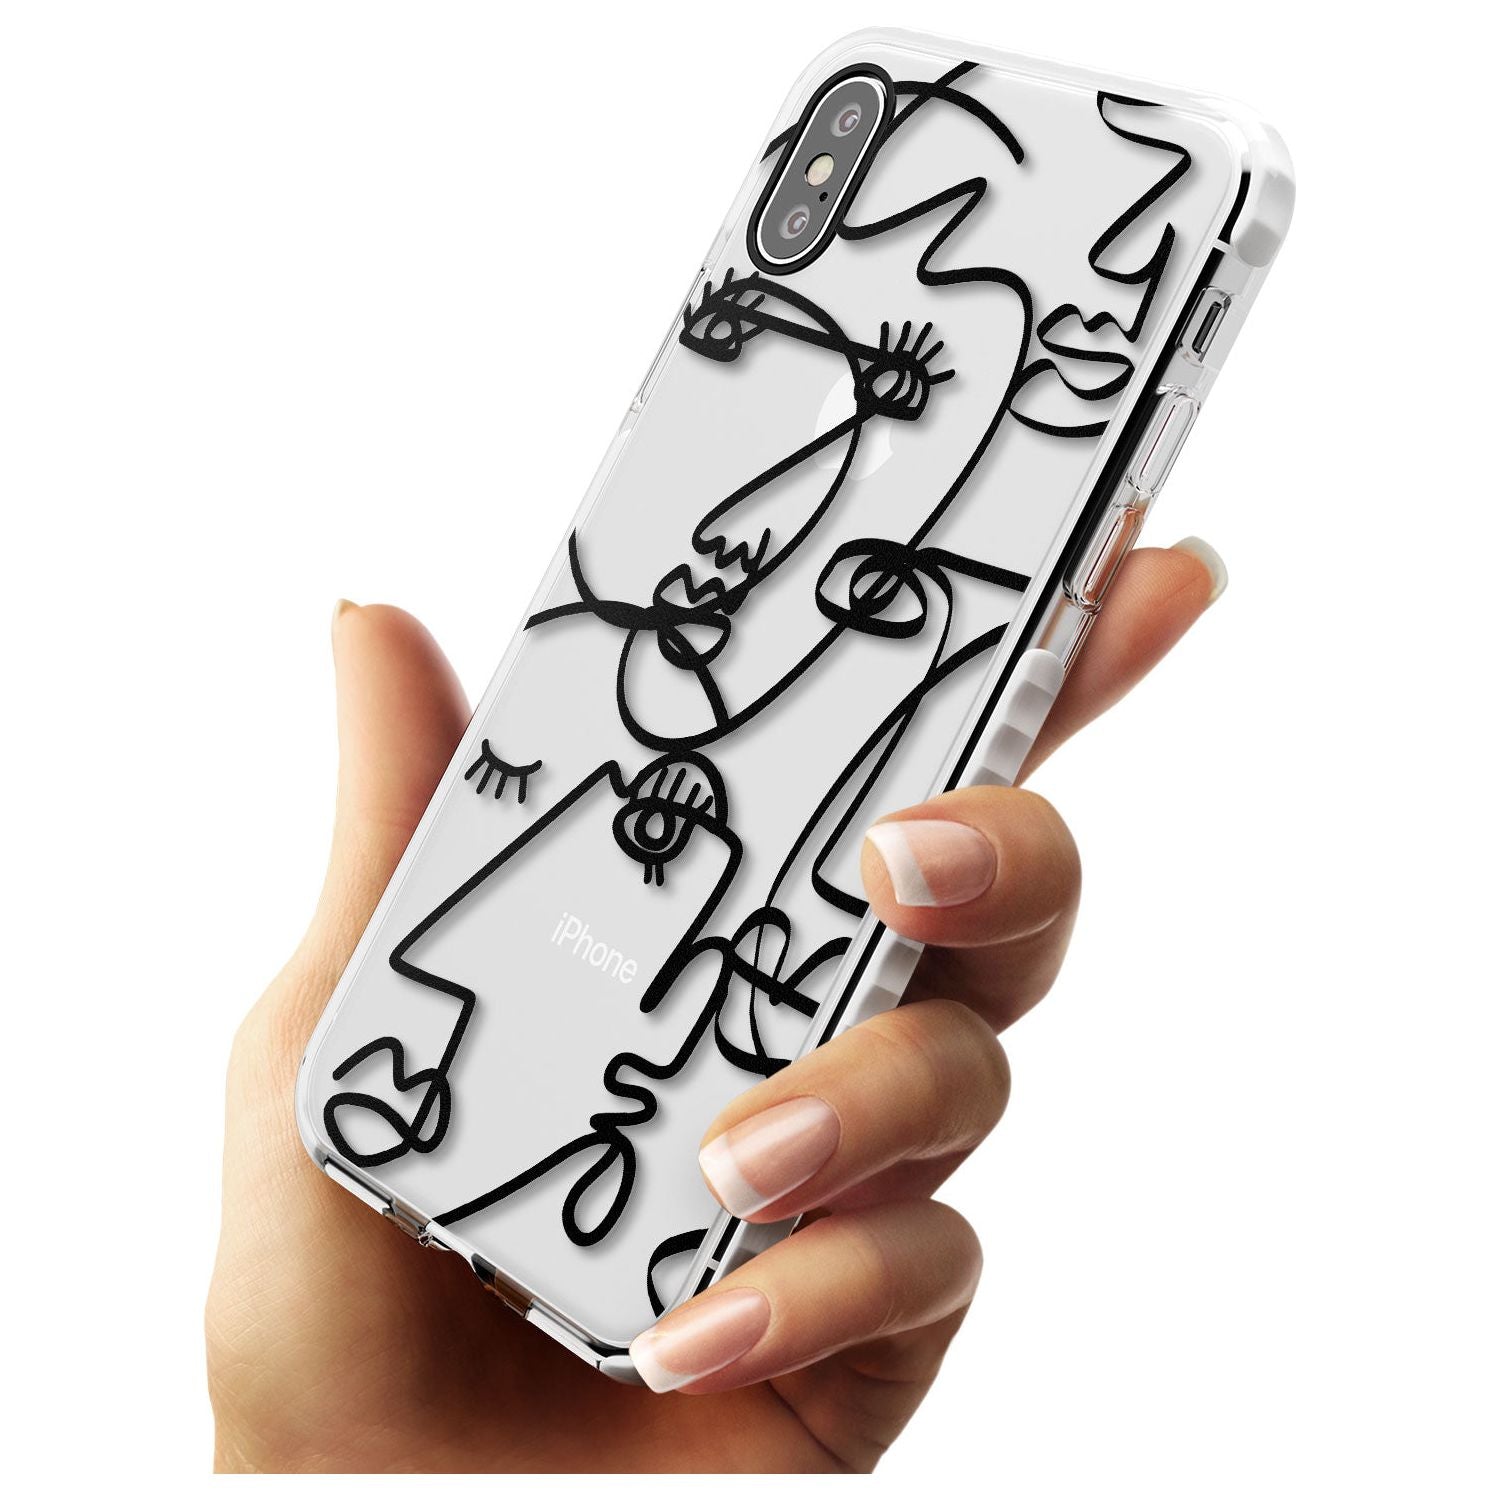 Continuous Line Faces: Black on Clear Slim TPU Phone Case Warehouse X XS Max XR